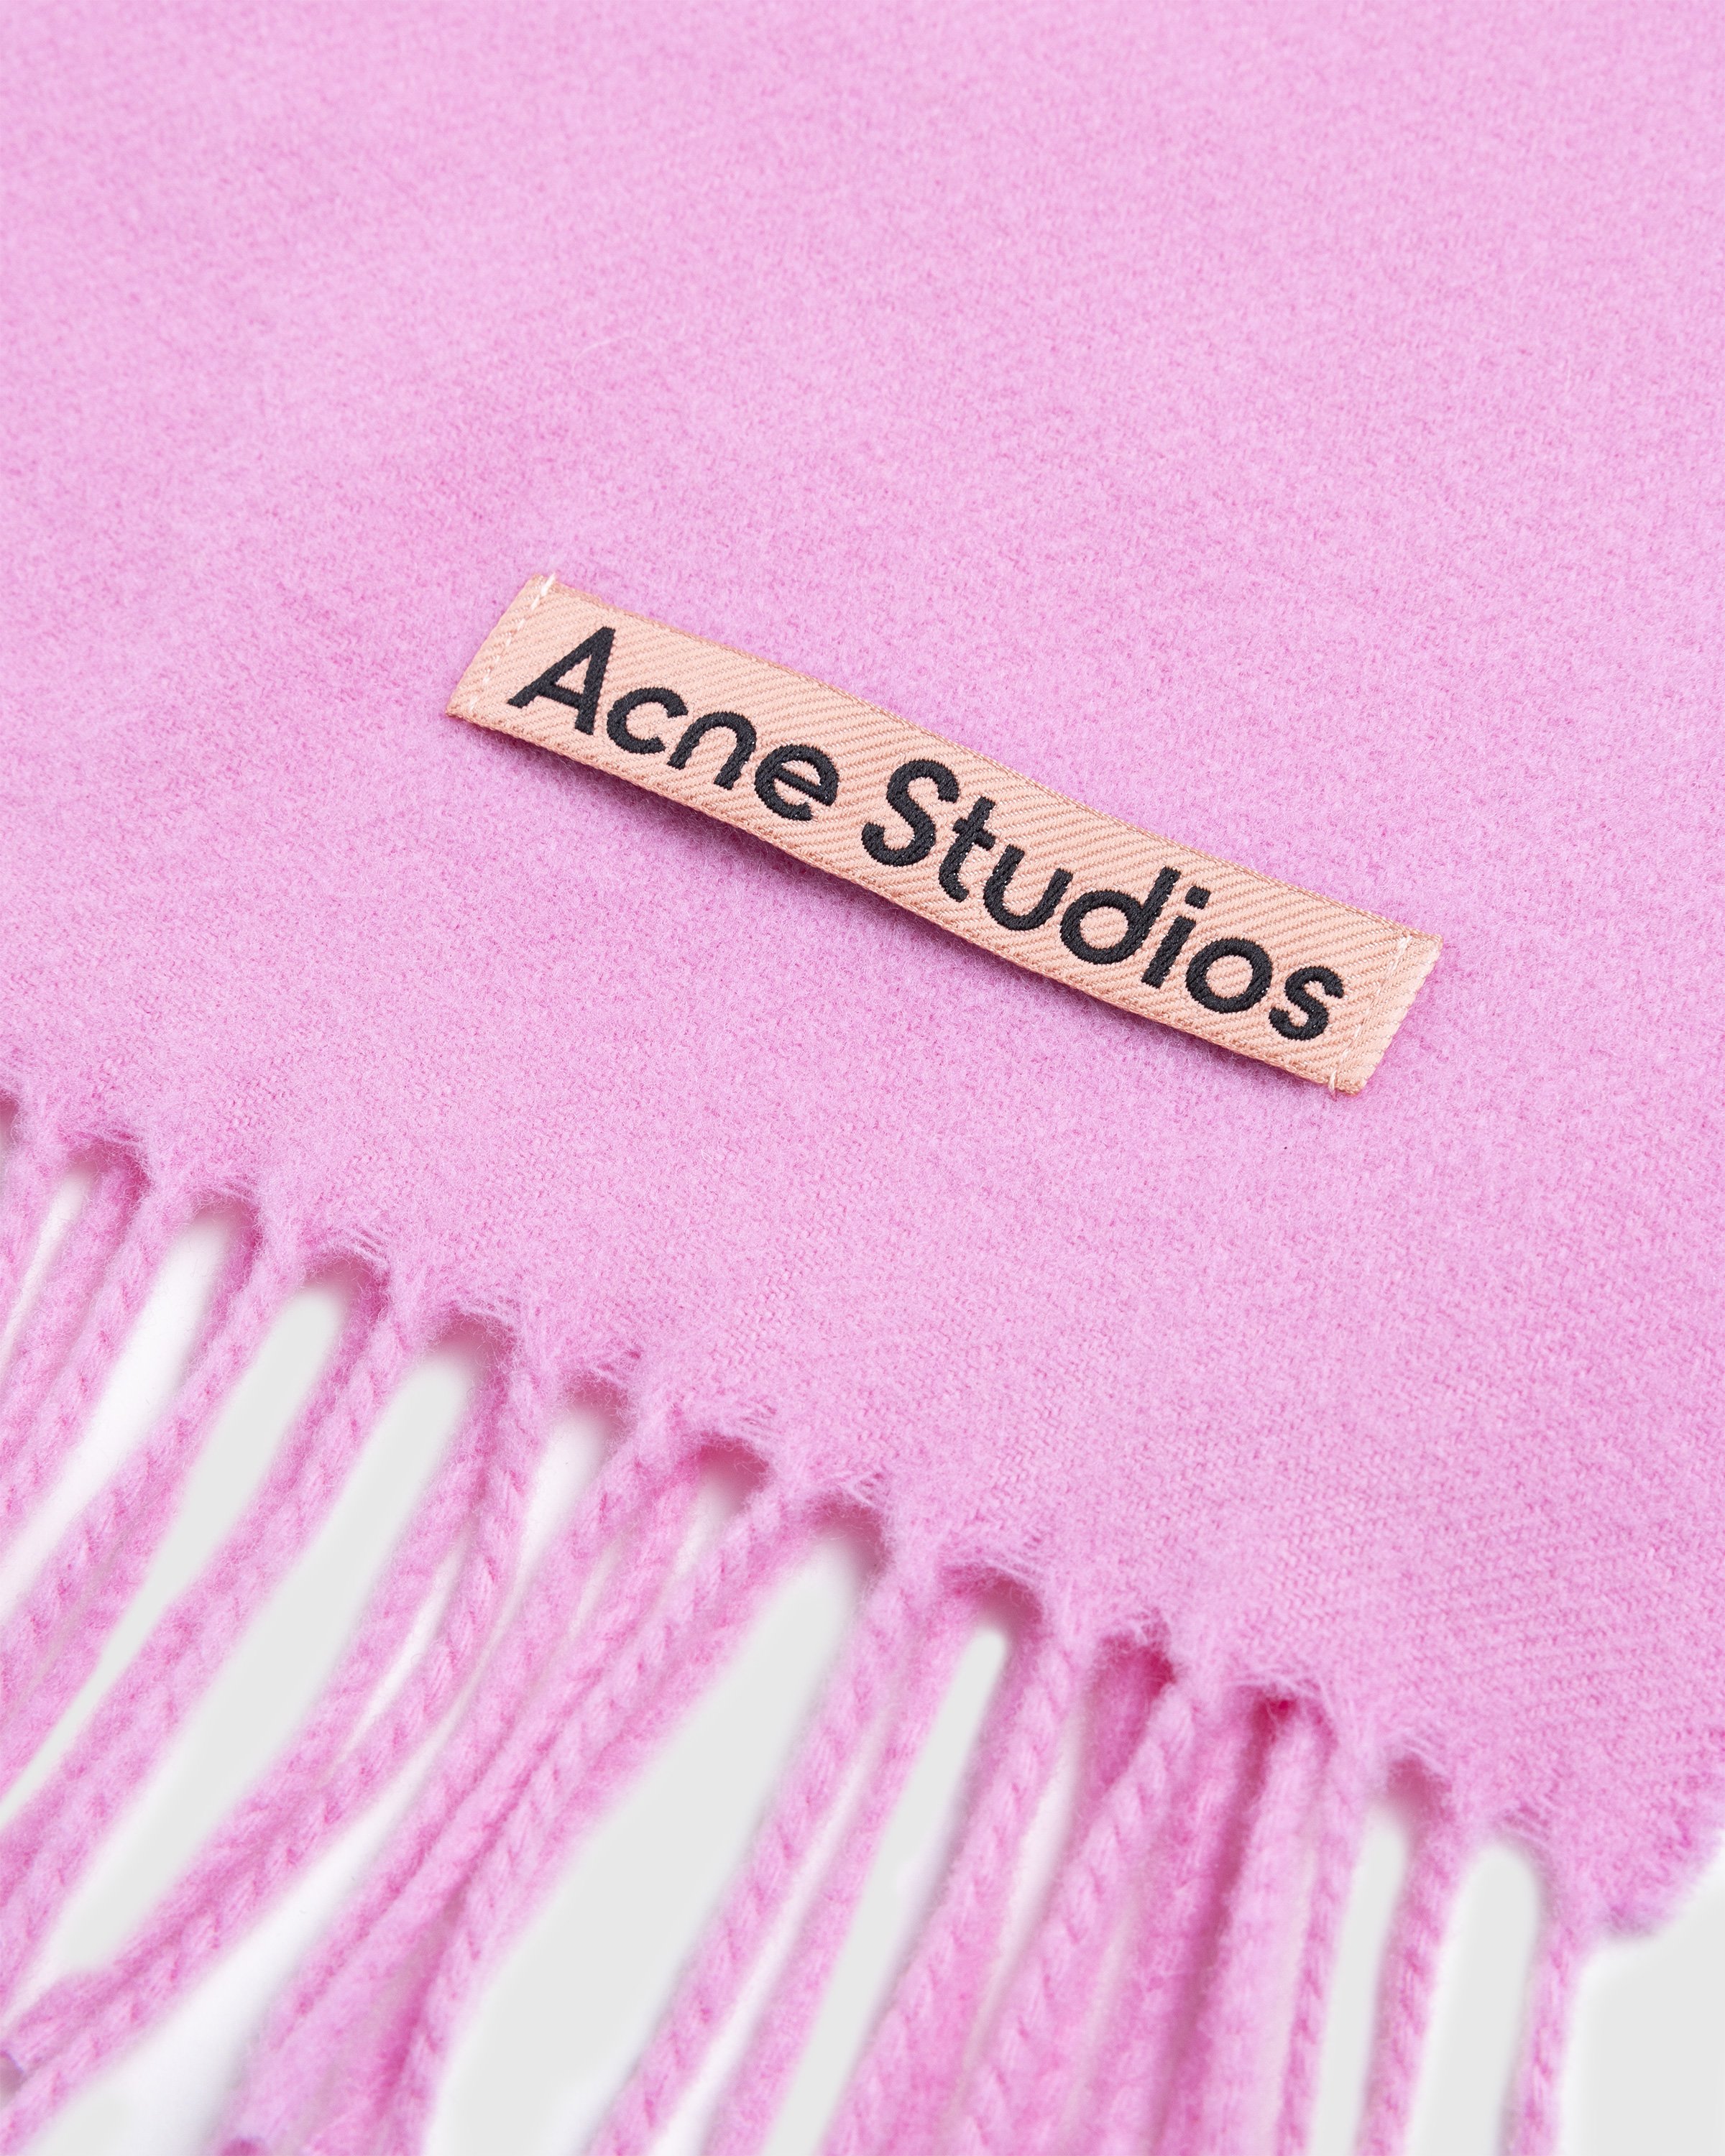 Acne Studios - Fringe Wool Scarf Bubble Pink - Accessories - Pink - Image 3